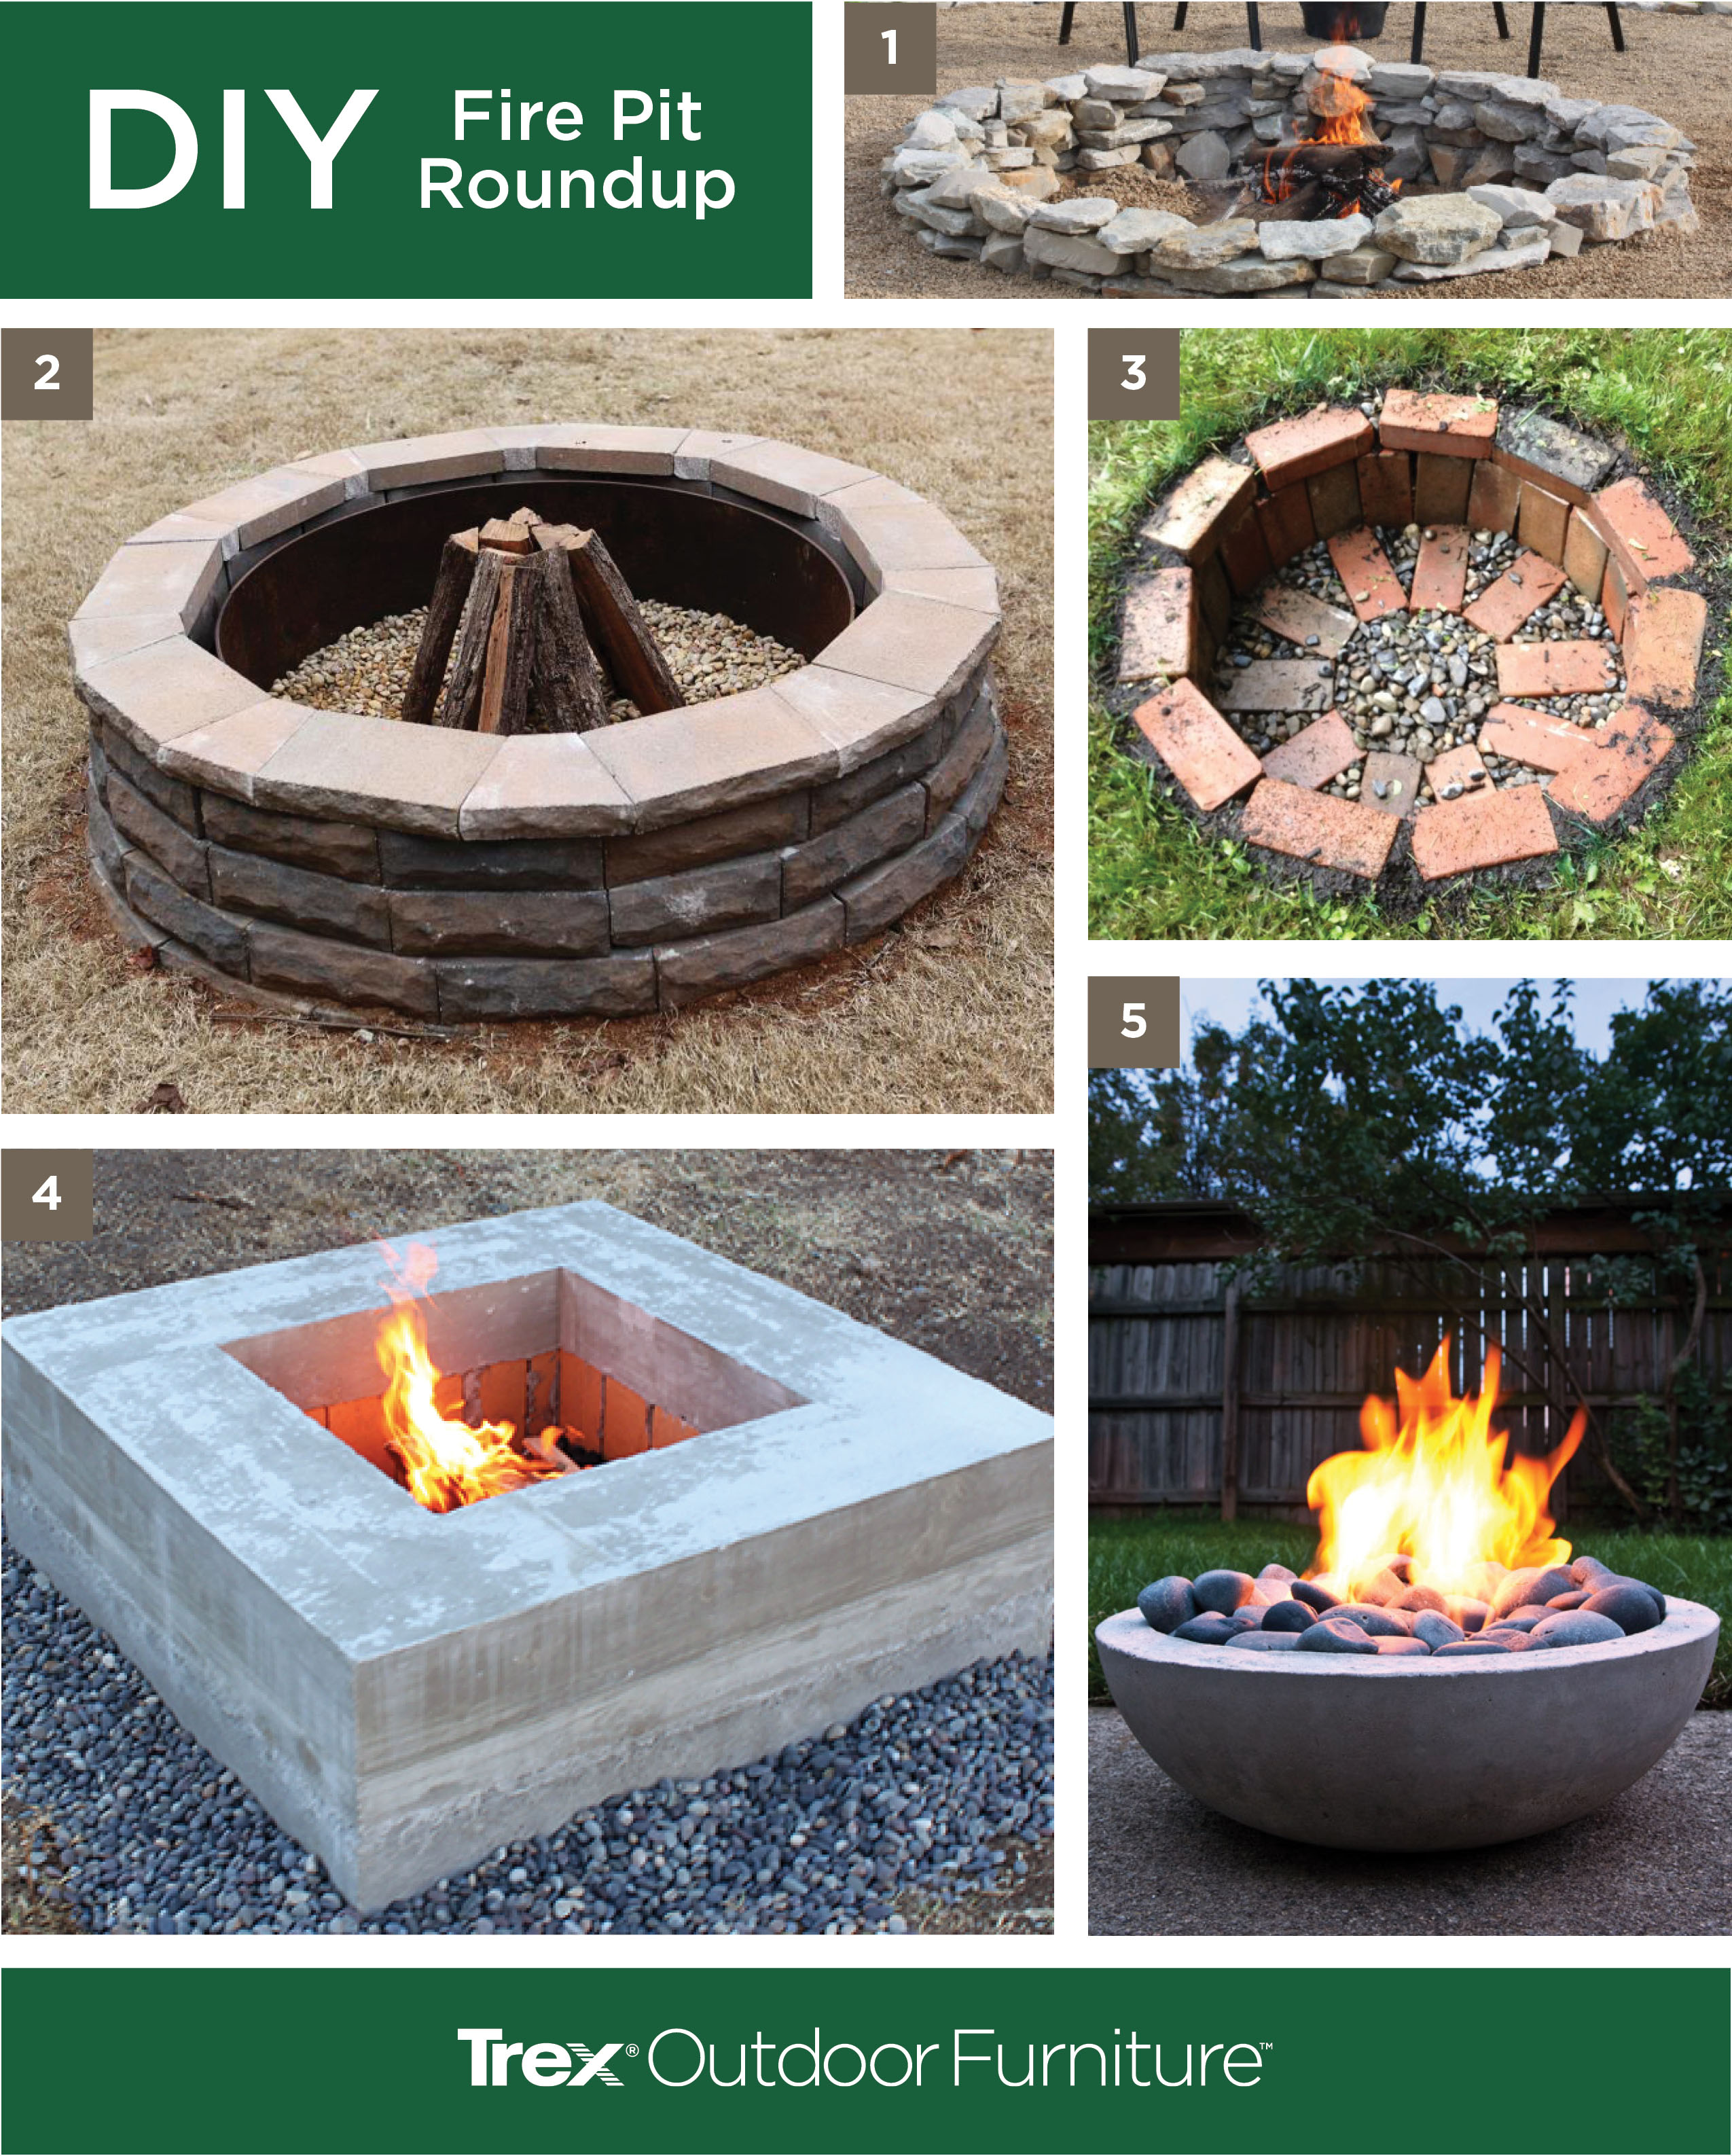 Warm Up With A Diy Fire Pit Living, How To Protect Metal Fire Pit